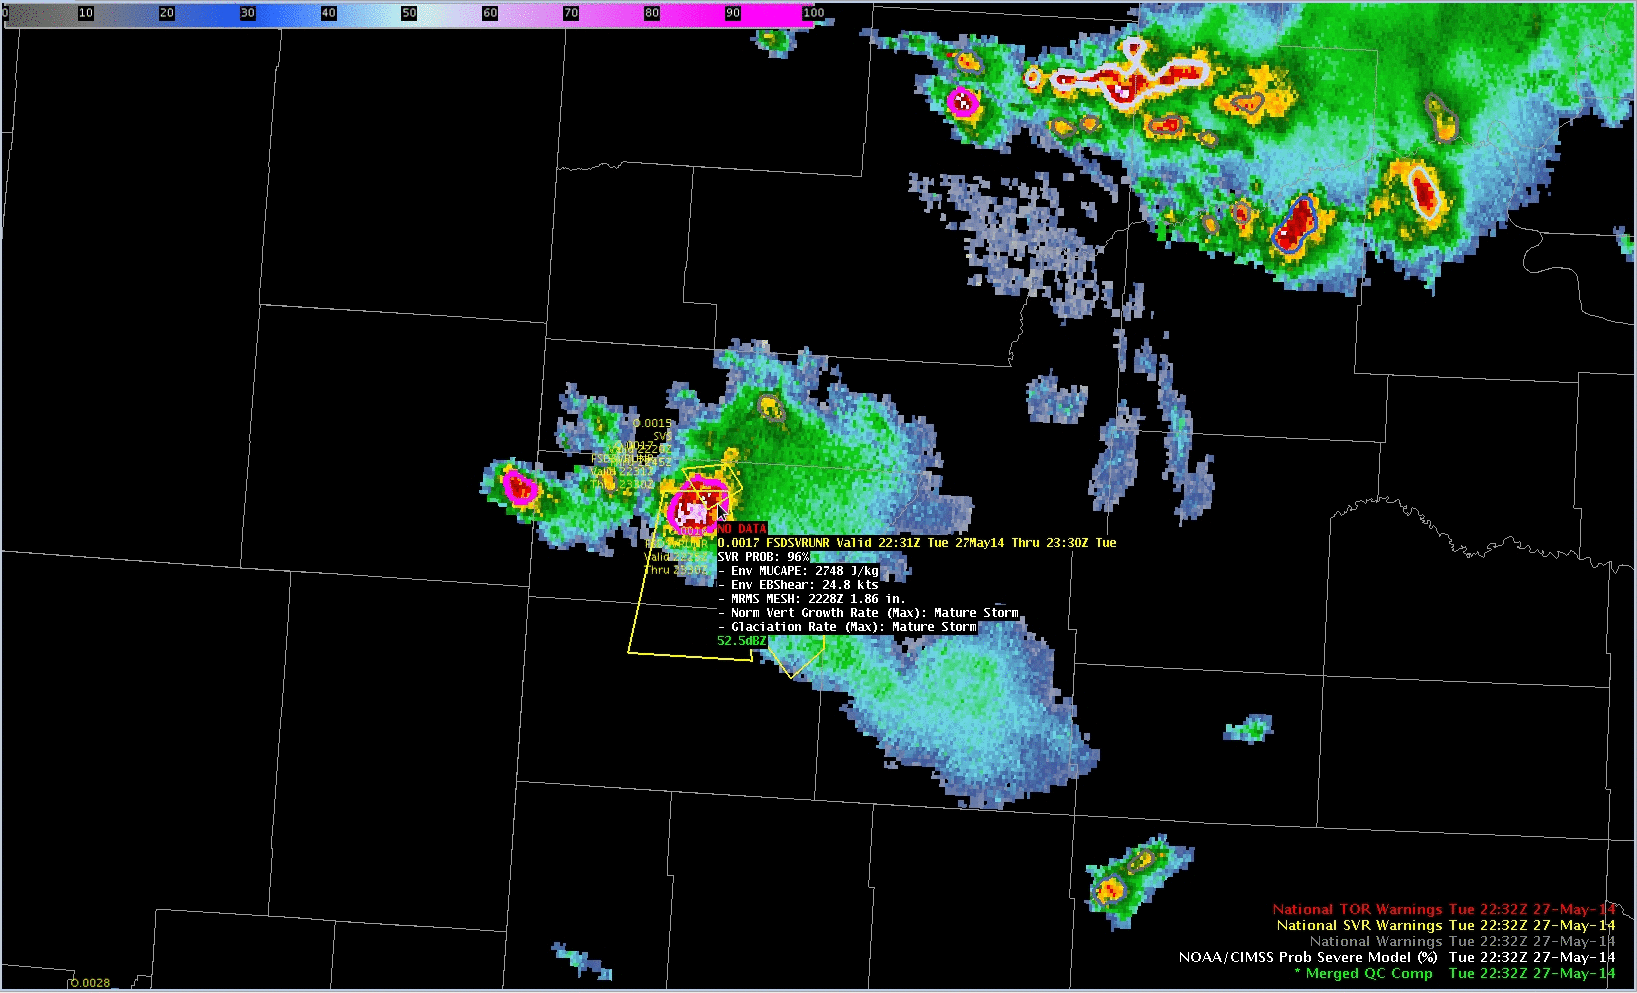 Annotated NOAA/CIMSS ProbSevere over South Dakota, times as indicated (Click to animate)